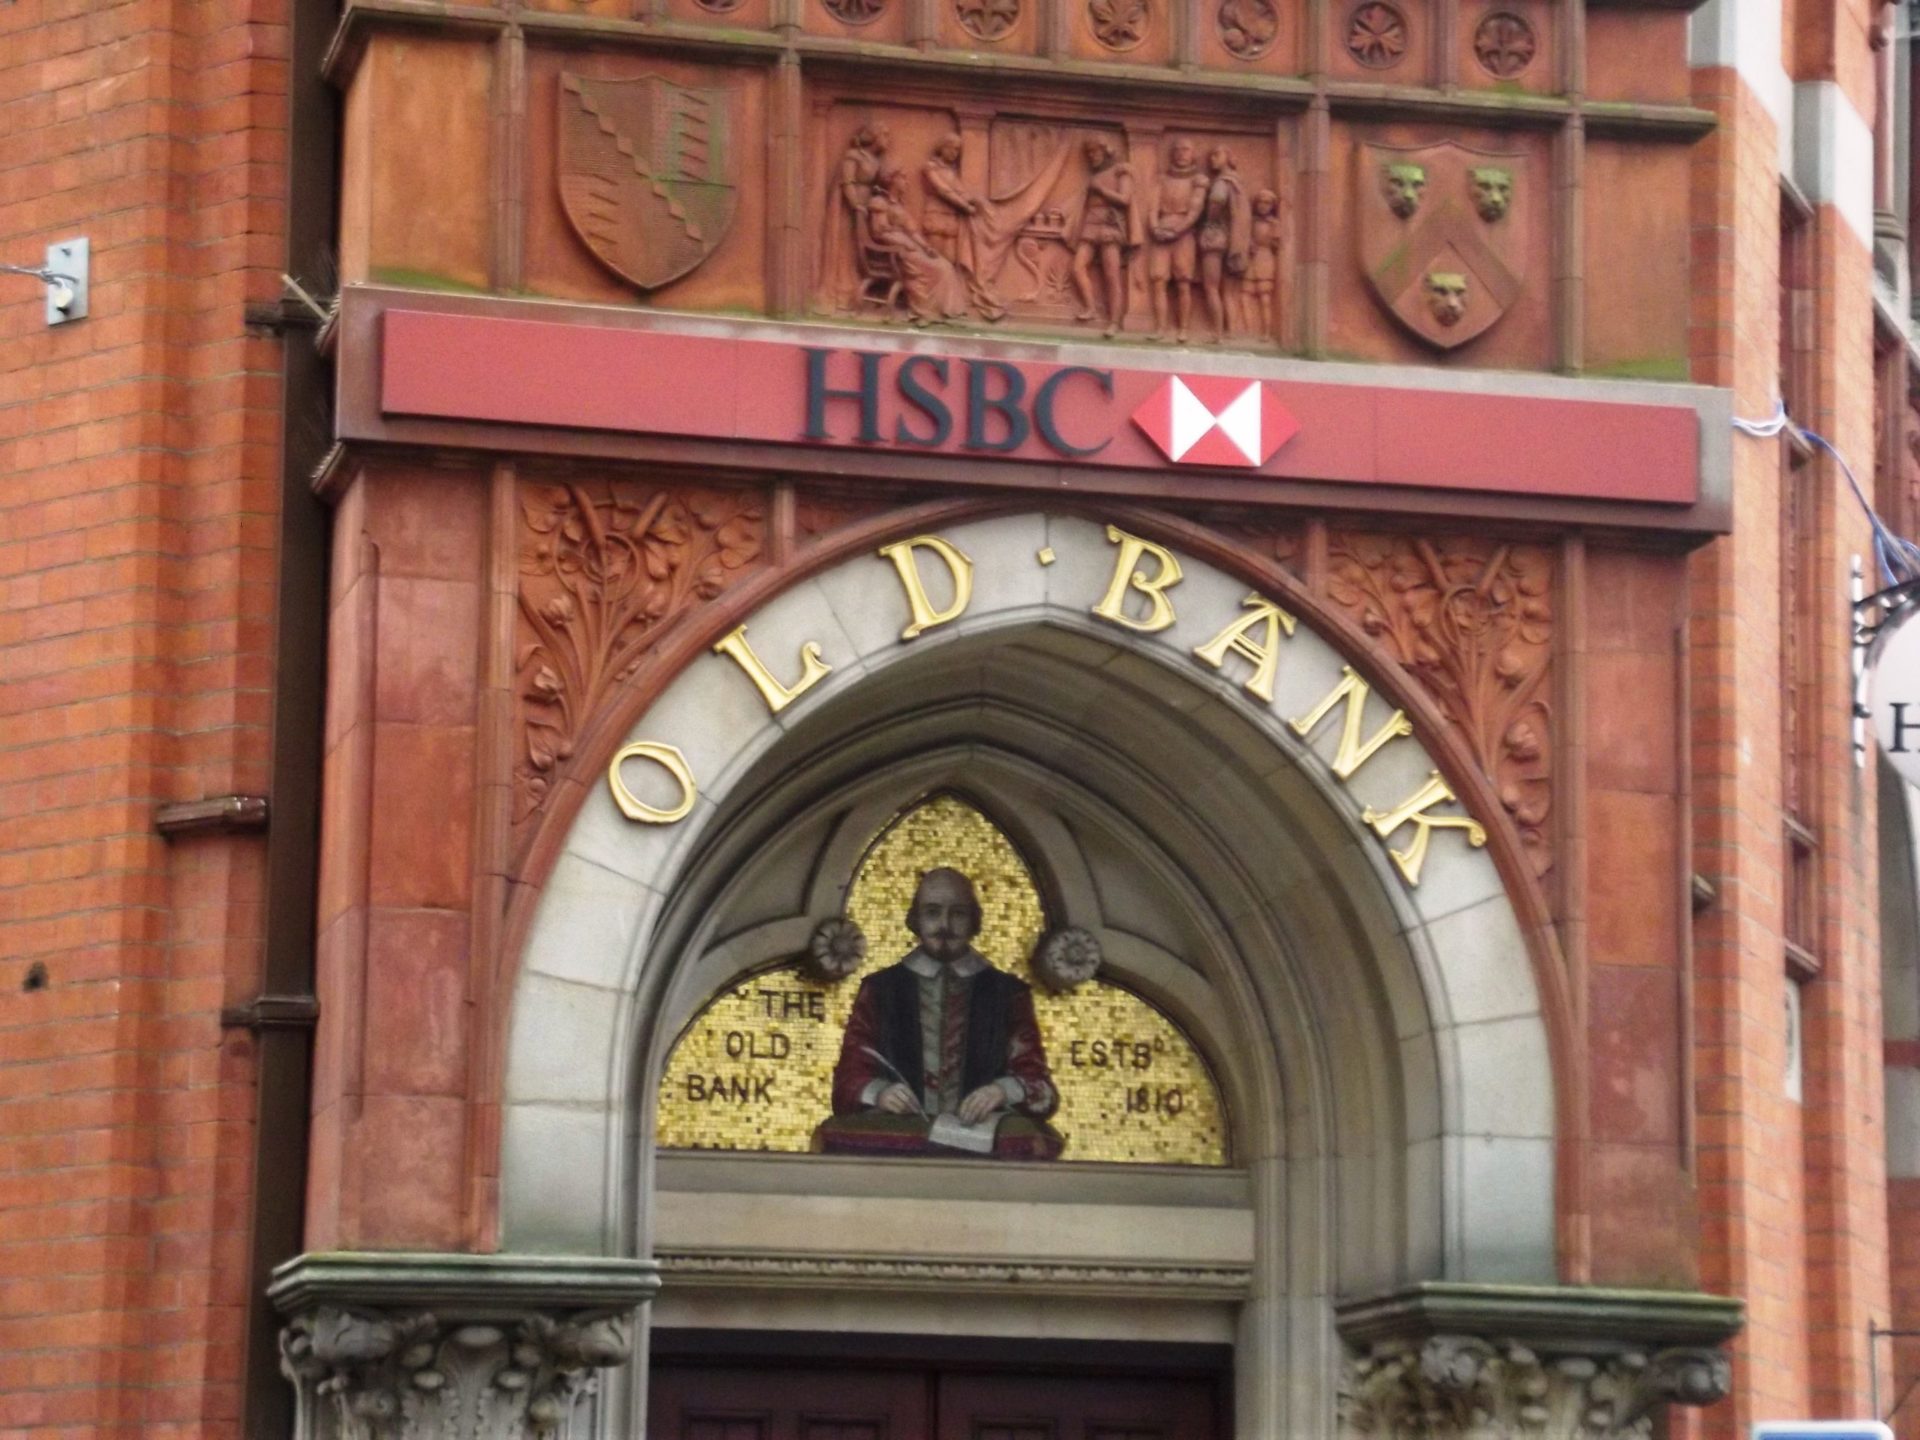 Ornate archway over the door of The Old Bank established 1810, now rebranded as HSBC Bank (Photo by Elliott Brown)